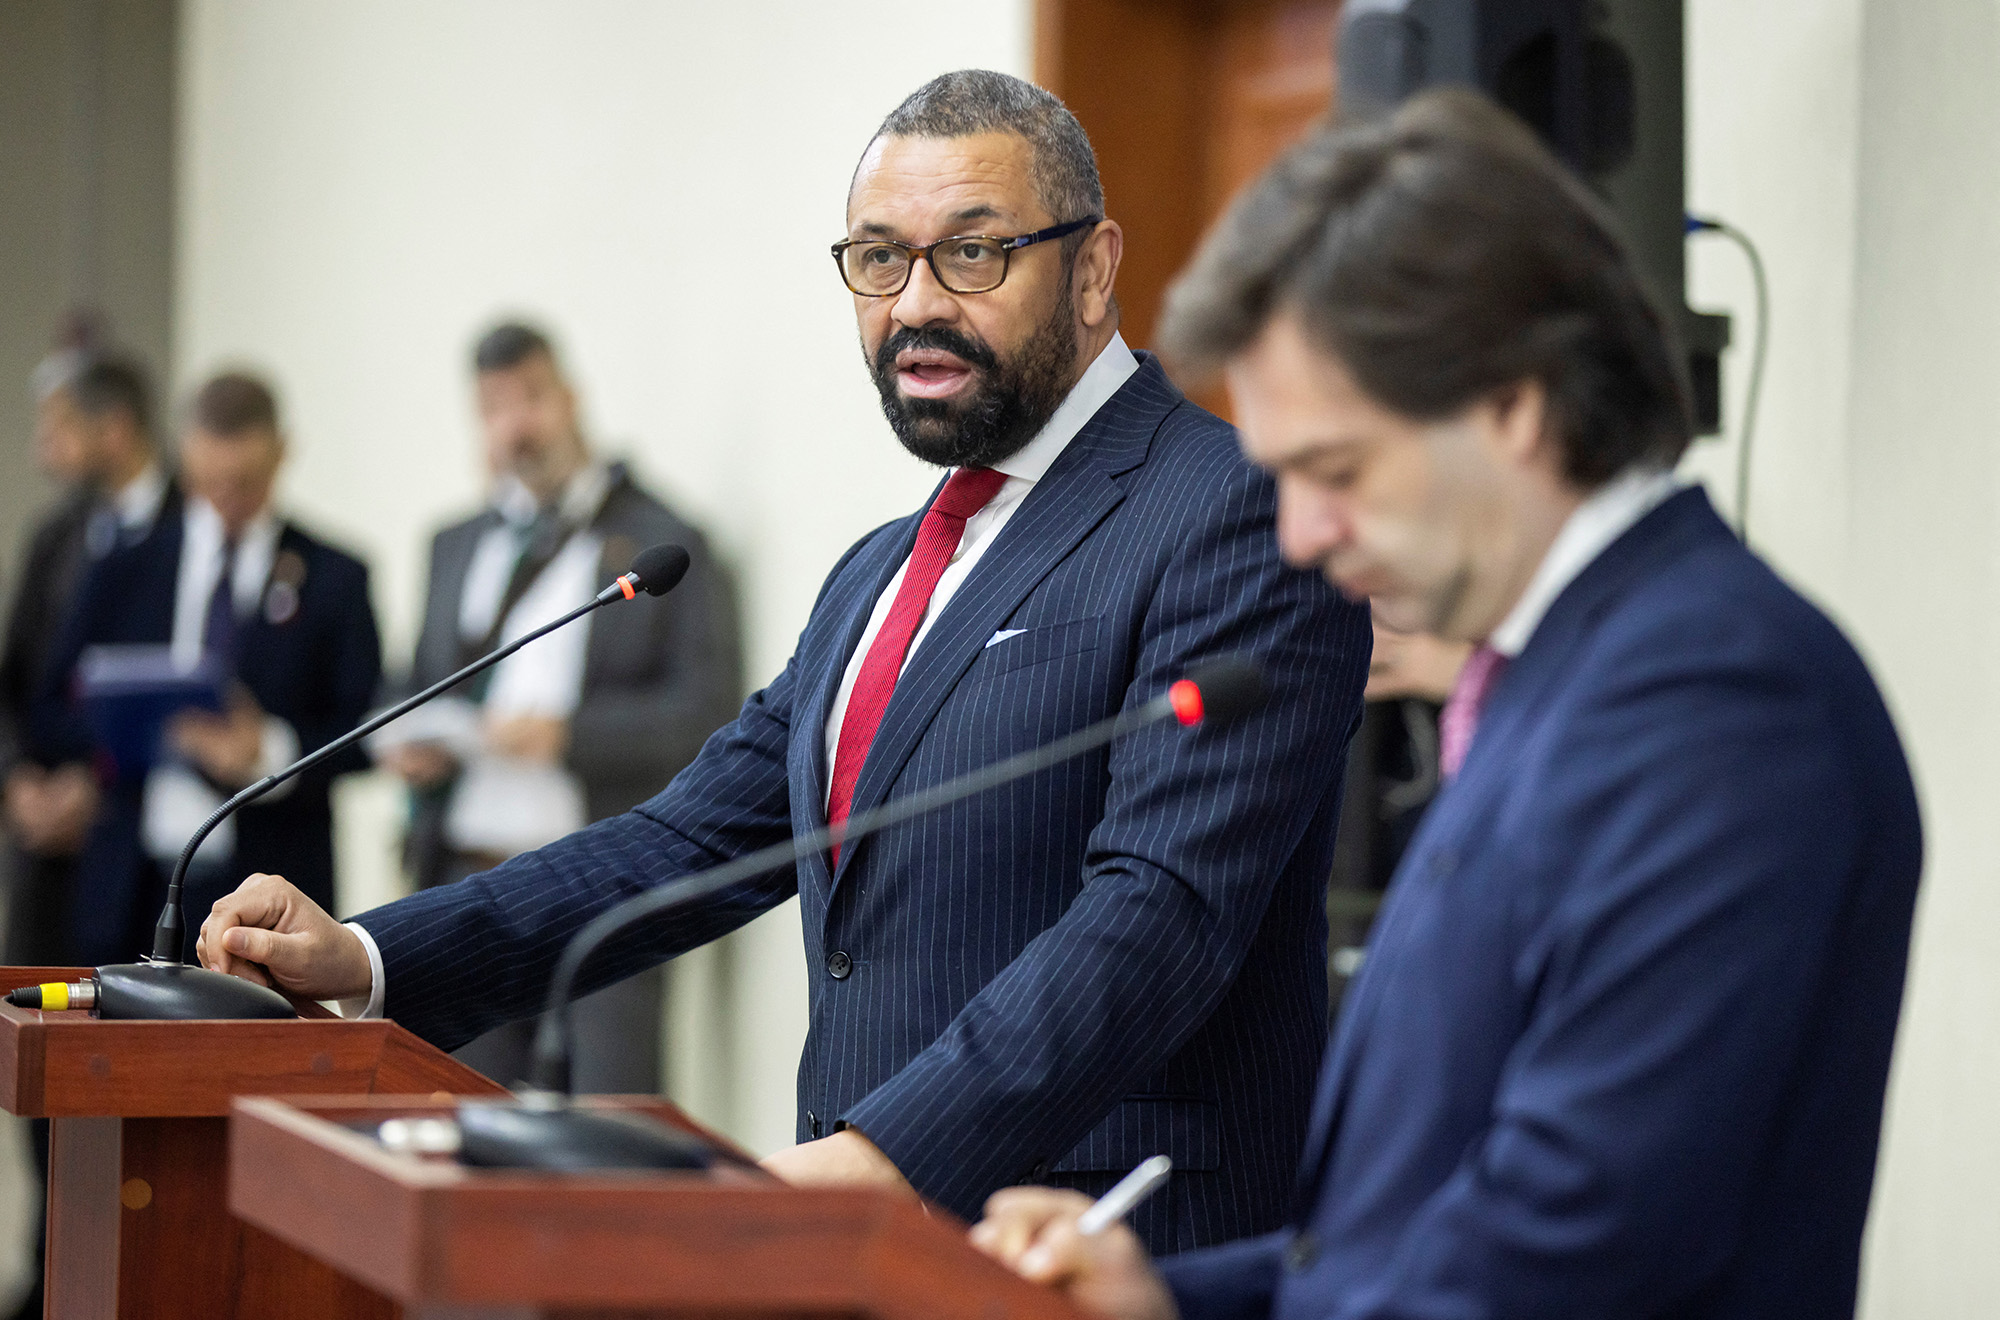 British Foreign Secretary James Cleverly, center left, and Moldovan Foreign Minister Nicu Popescu attend a news conference in Chisinau, Moldova, on March 16.